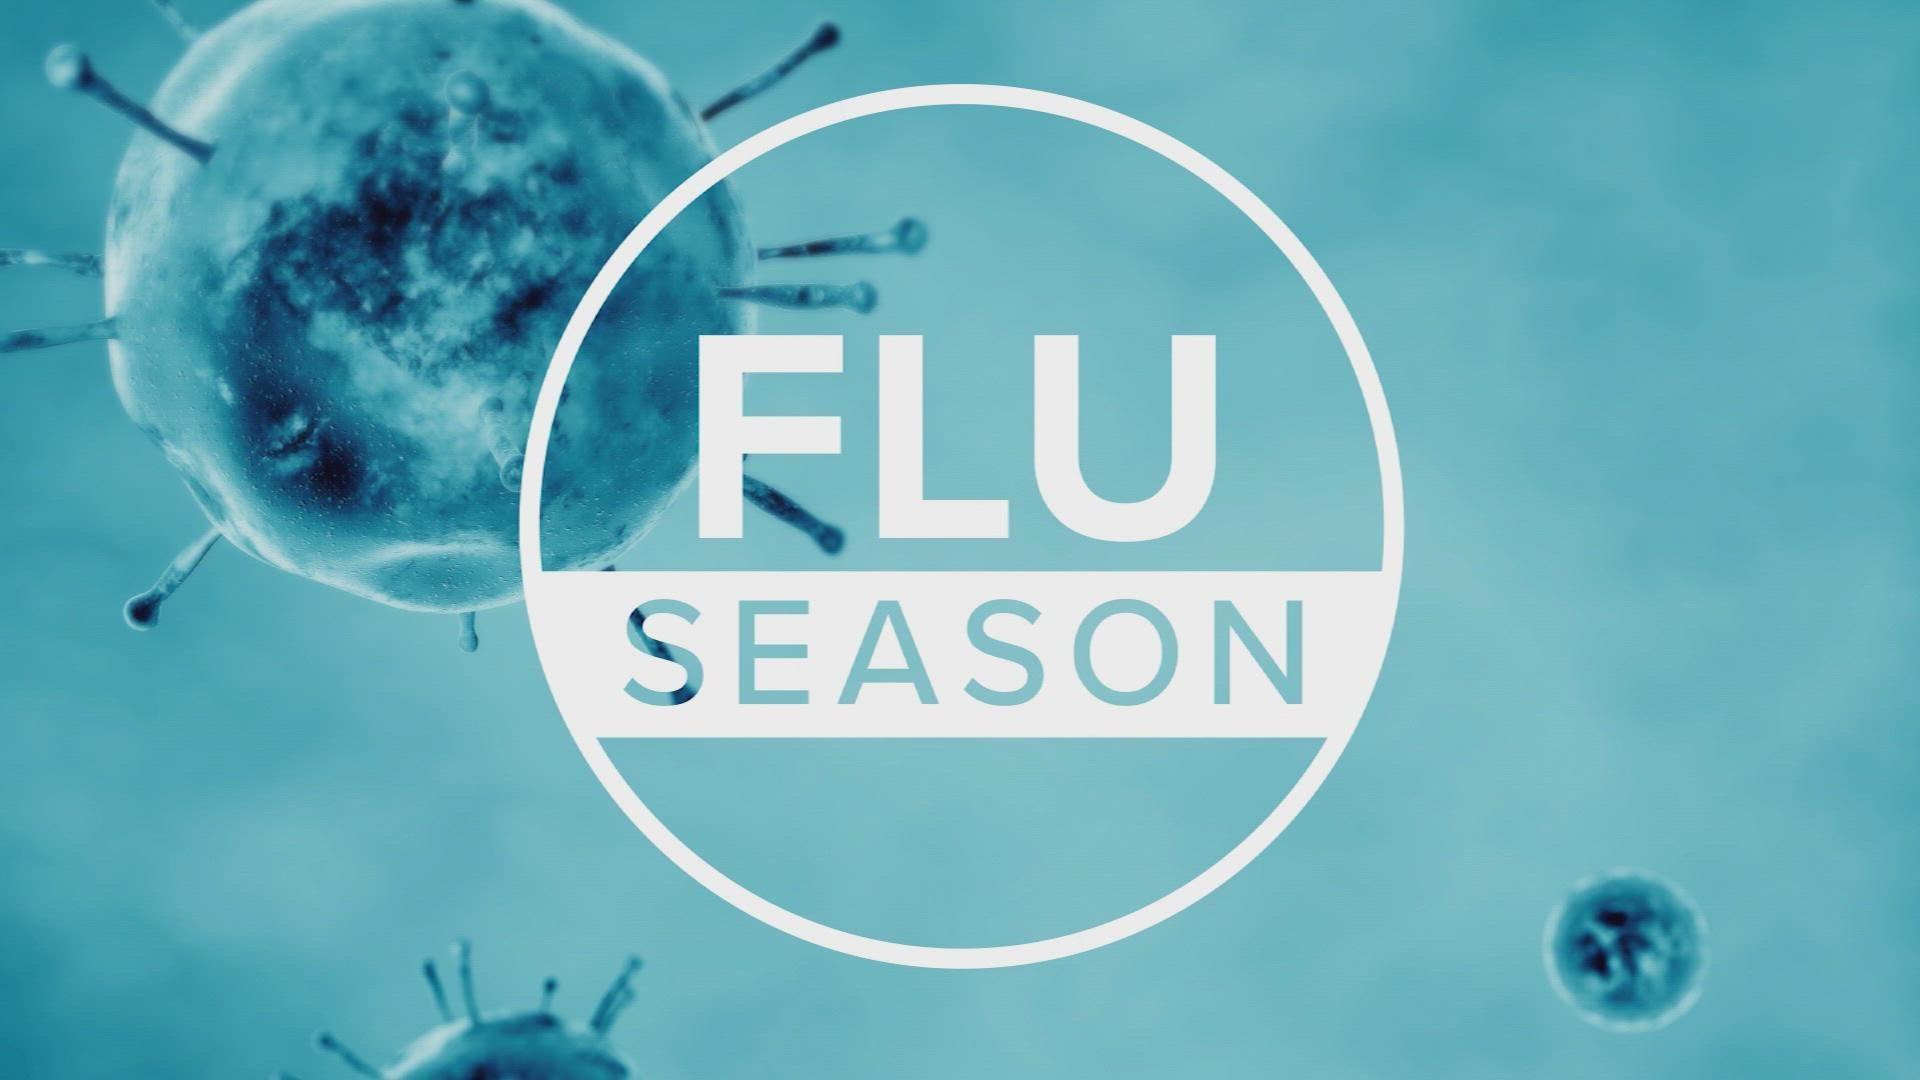 The current flu season has been one of the worst, with the highest number of cases in nearly a decade.